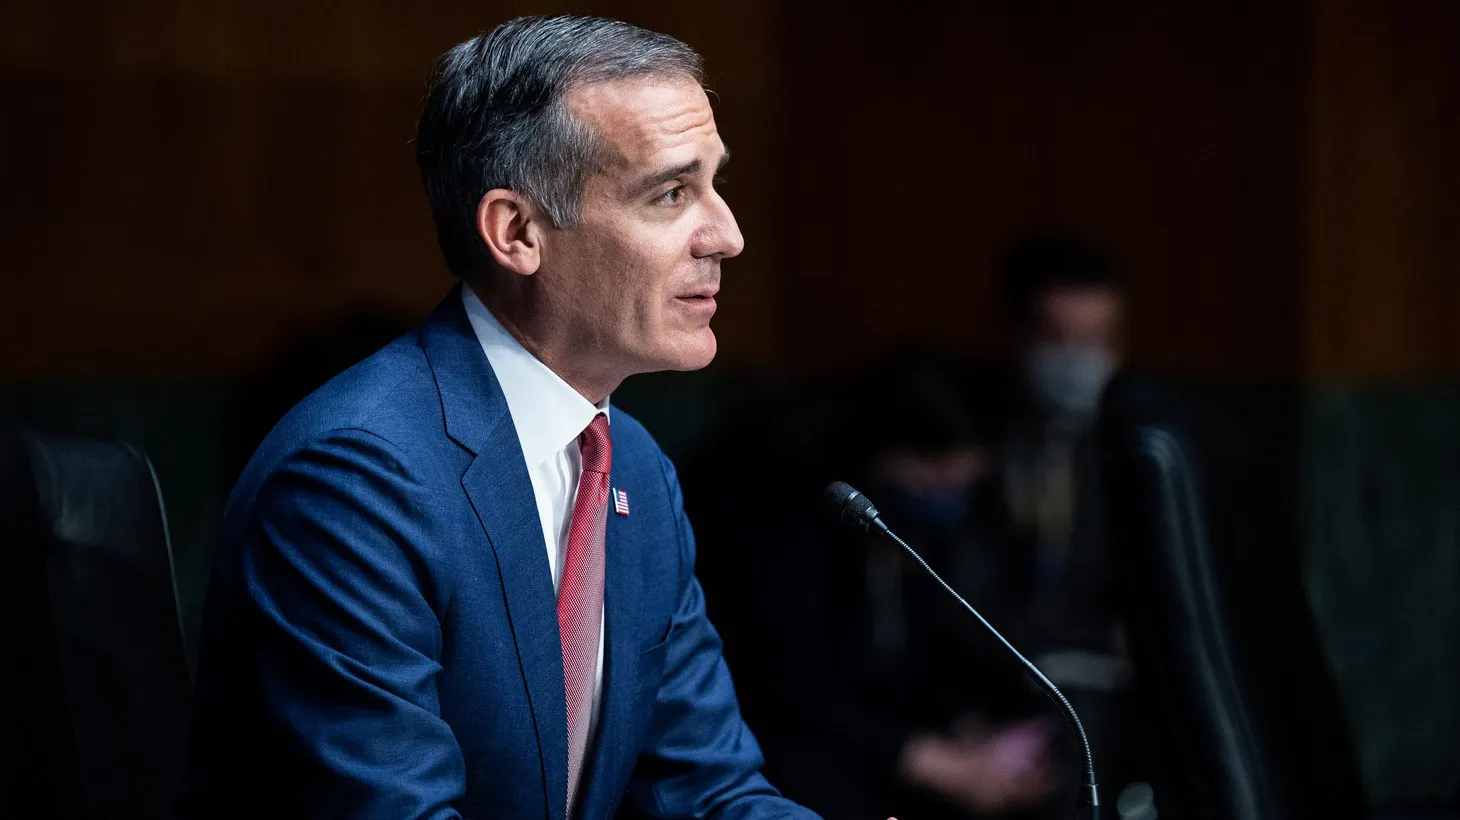 Eric Garcetti, nominee to be ambassador to the Republic of India, speaks at a hearing of the Senate Foreign Relations Committee, December 14, 2021, Washington, D.C.